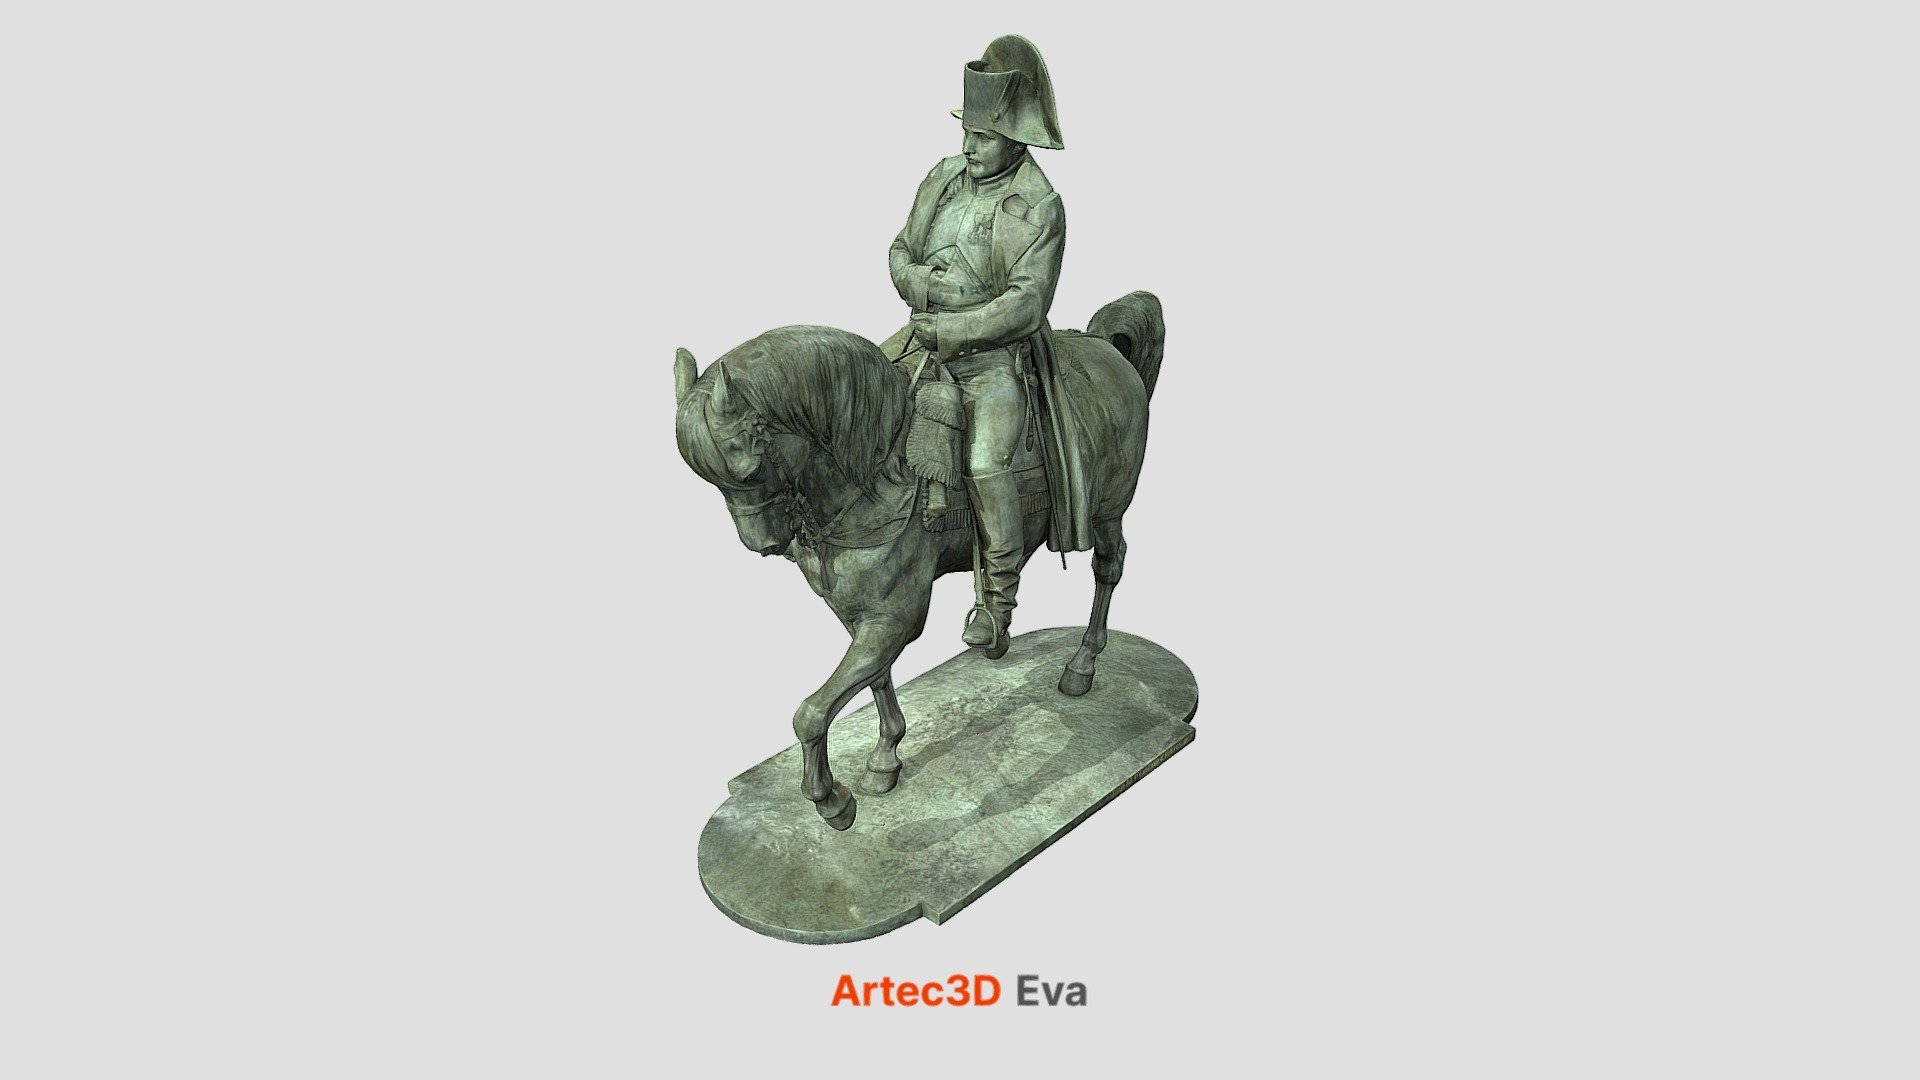 A 3D model of a 4.5-meter tall monument to Napoleon on horseback made by the French 3D visualization company IMA Solutions using an Artec Eva https://www.artec3d.com/portable-3d-scanners/artec-eva along with a battery and a tablet, for the Musée de la Révolution française in Vizille, France. © IMA Solutions www.ima-solutions.fr Musée de la Révolution française www.domaine-vizille.fr You can download this model from our website https://www.artec3d.com/3d-models/napoleon

And if you'd like the full story about this scanning project, please visit https://www.artec3d.com/cases/napoleon-monument-scanned-artec-eva

Scanning time: 2 days
Processing time: 10 days - Napoleon - 3D model by Artec 3D 3d model